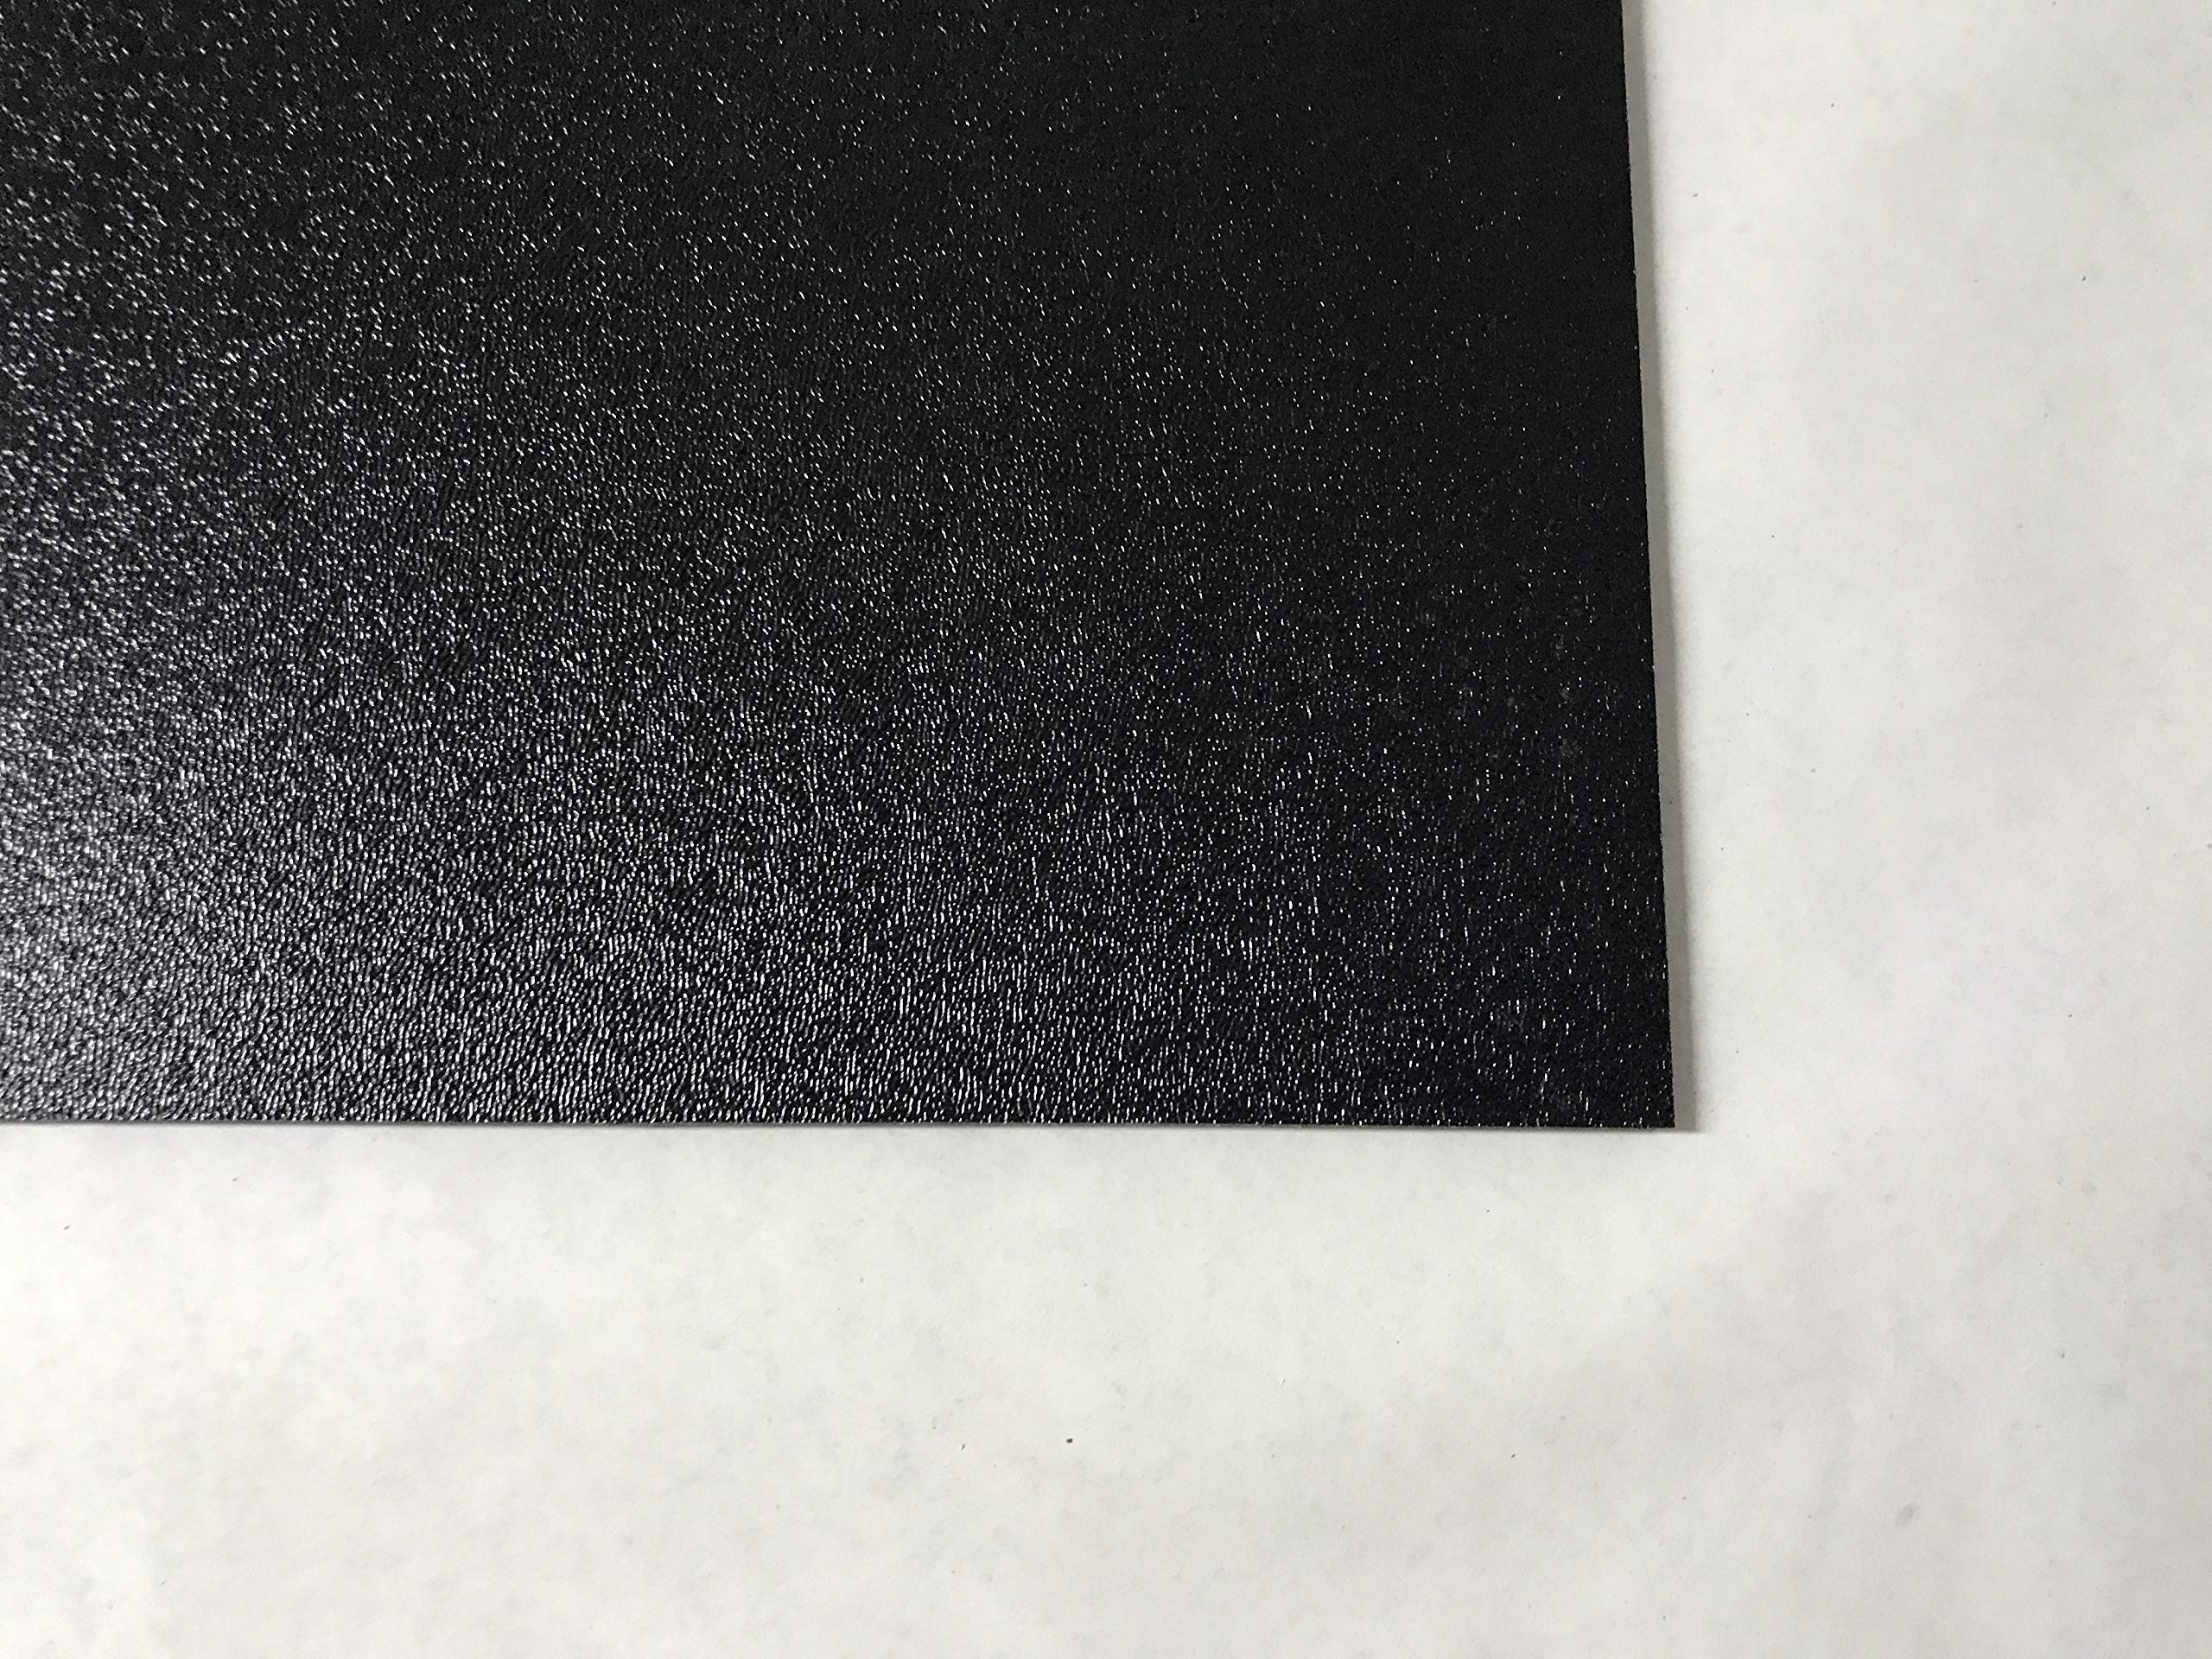 Polymersan Abs Black Plastic Sheet 116 X 48 X 96A Textured 1 Side Vacuum Forming